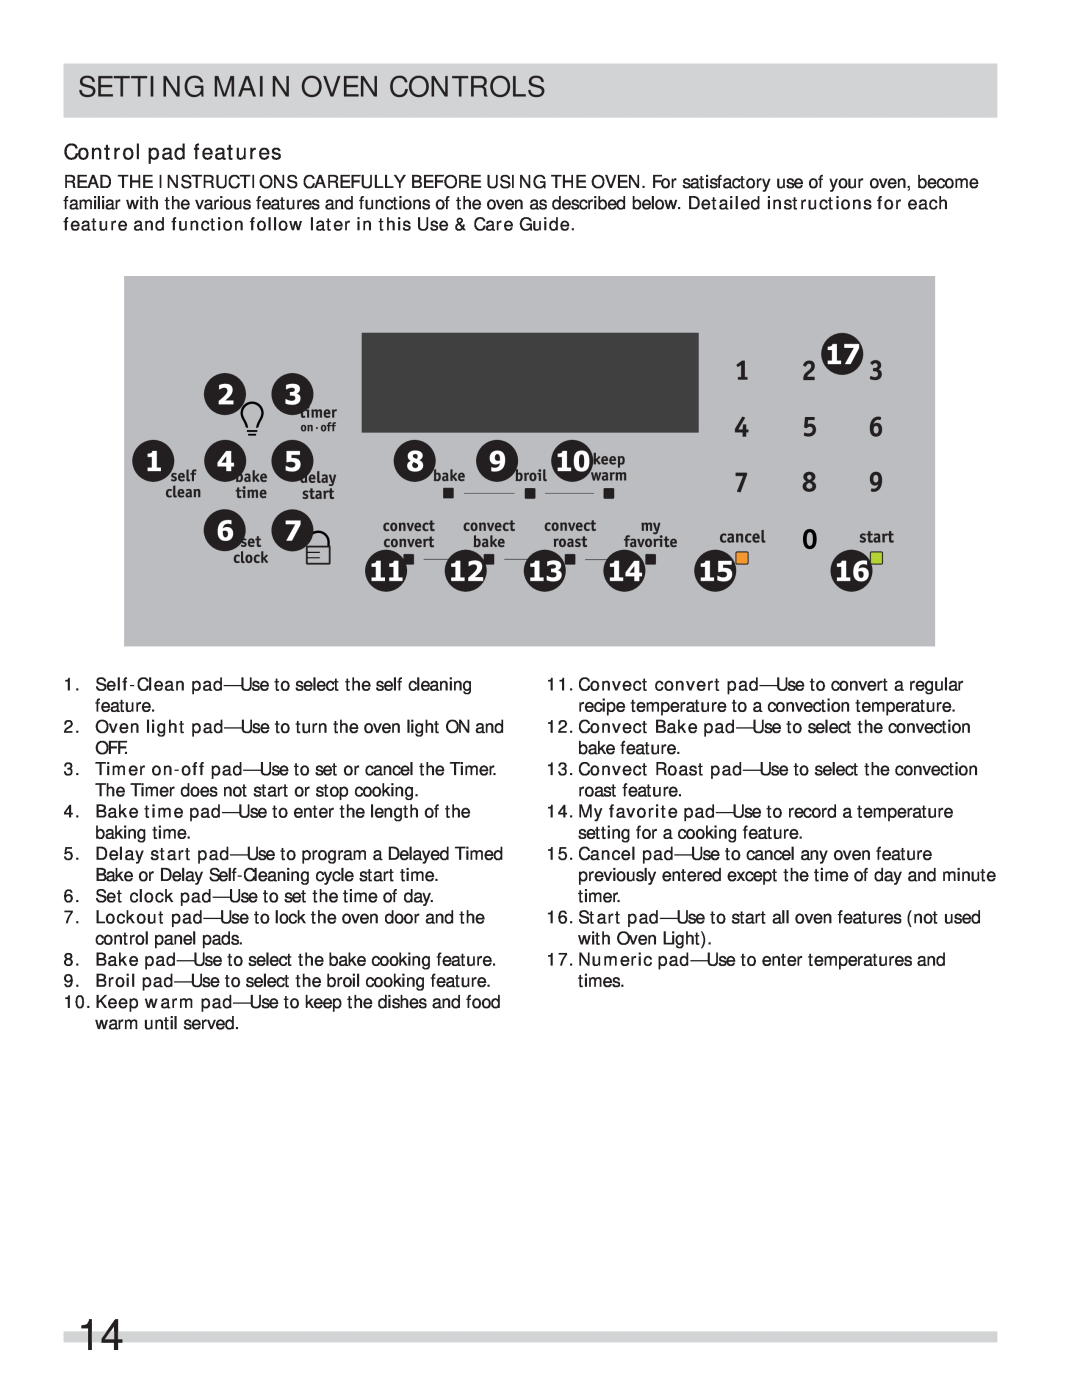 Frigidaire FPEF4085KF important safety instructions Setting Main Oven Controls, Control pad features 